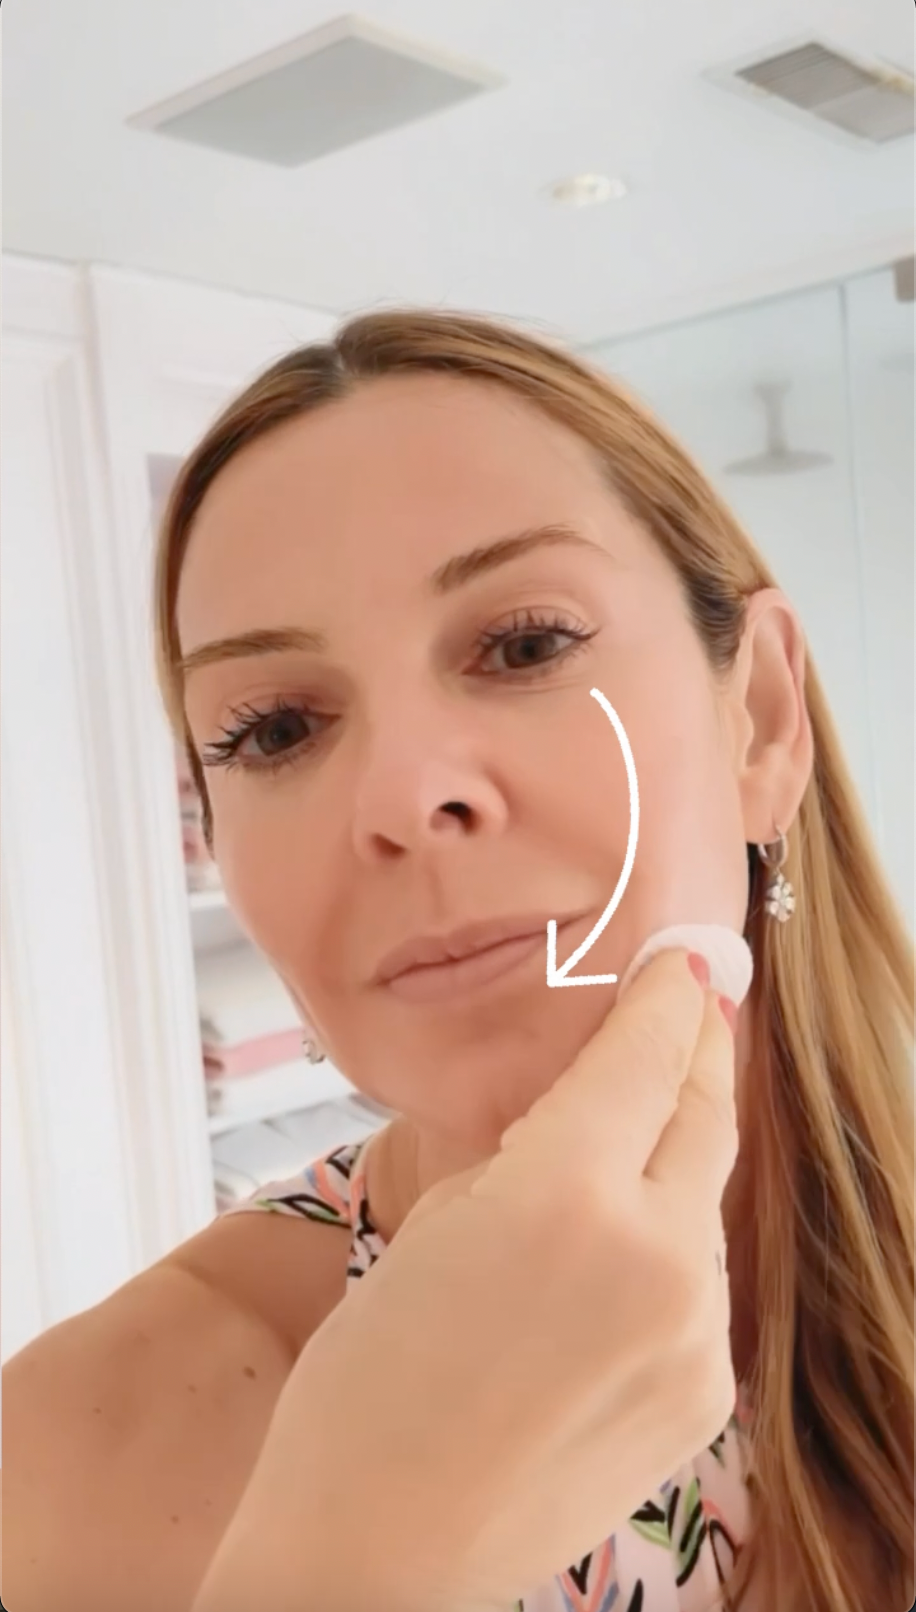 How to apply Hydrating Peel Pads